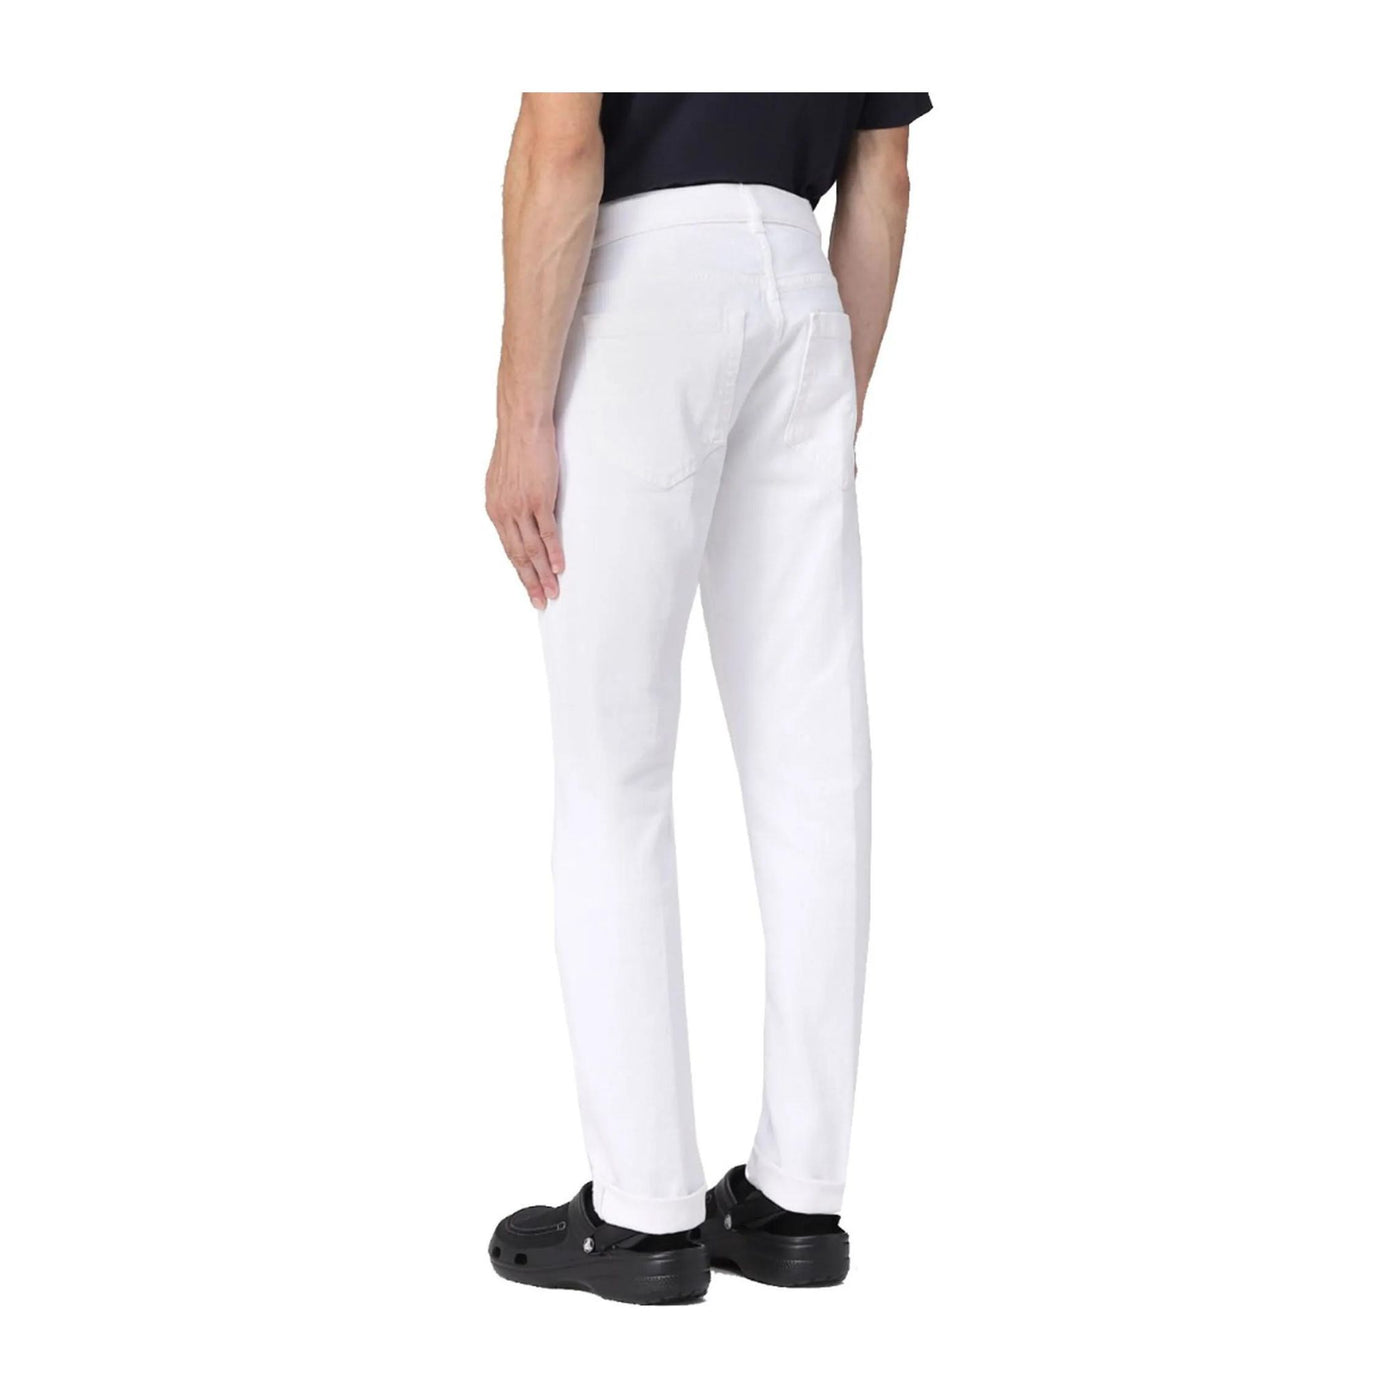 Men's jeans in stretch cotton